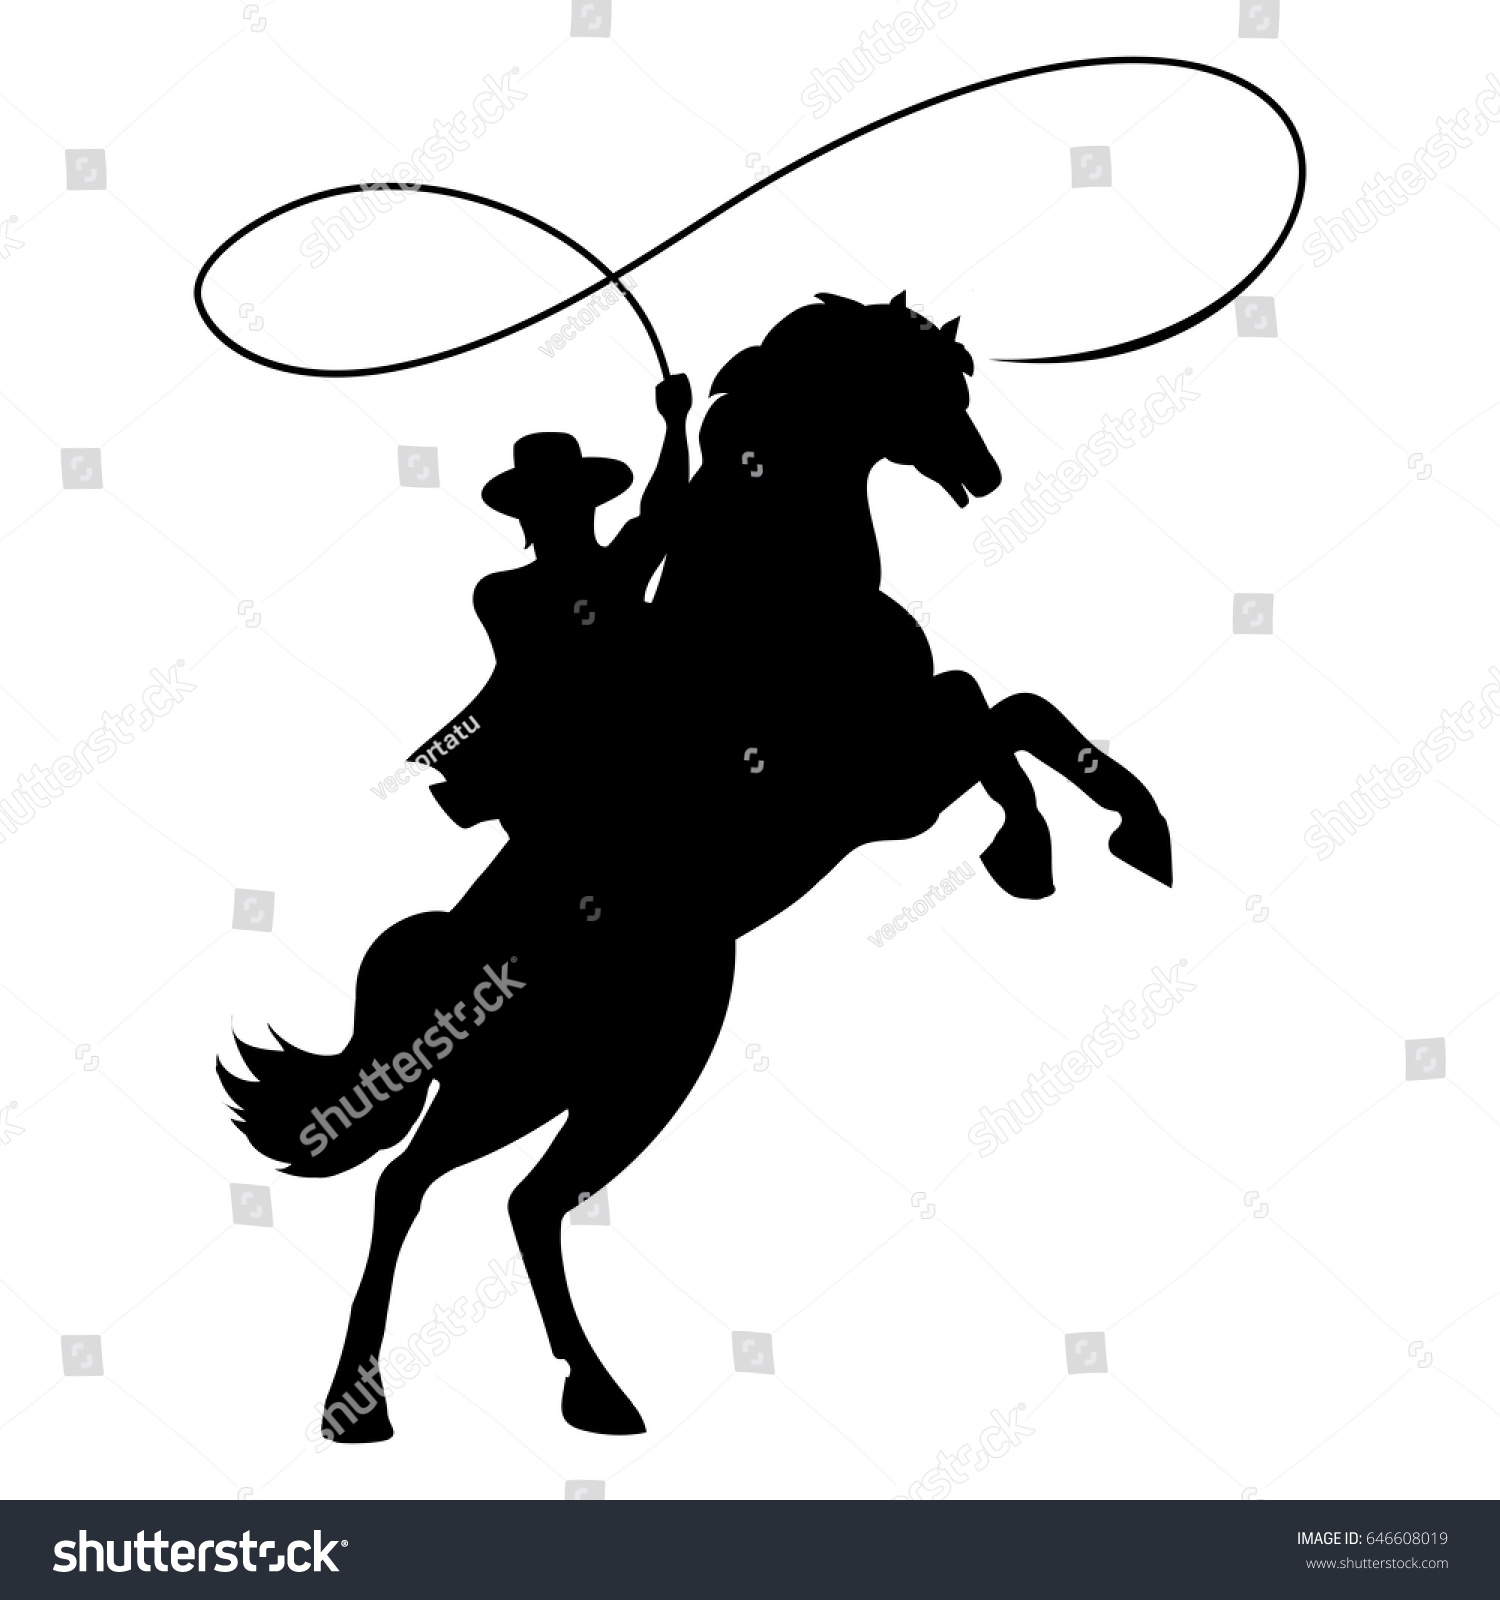 SVG of Cowboy silhouette with rope lasso on horse vector illustration isolated on white background for rodeo western design svg